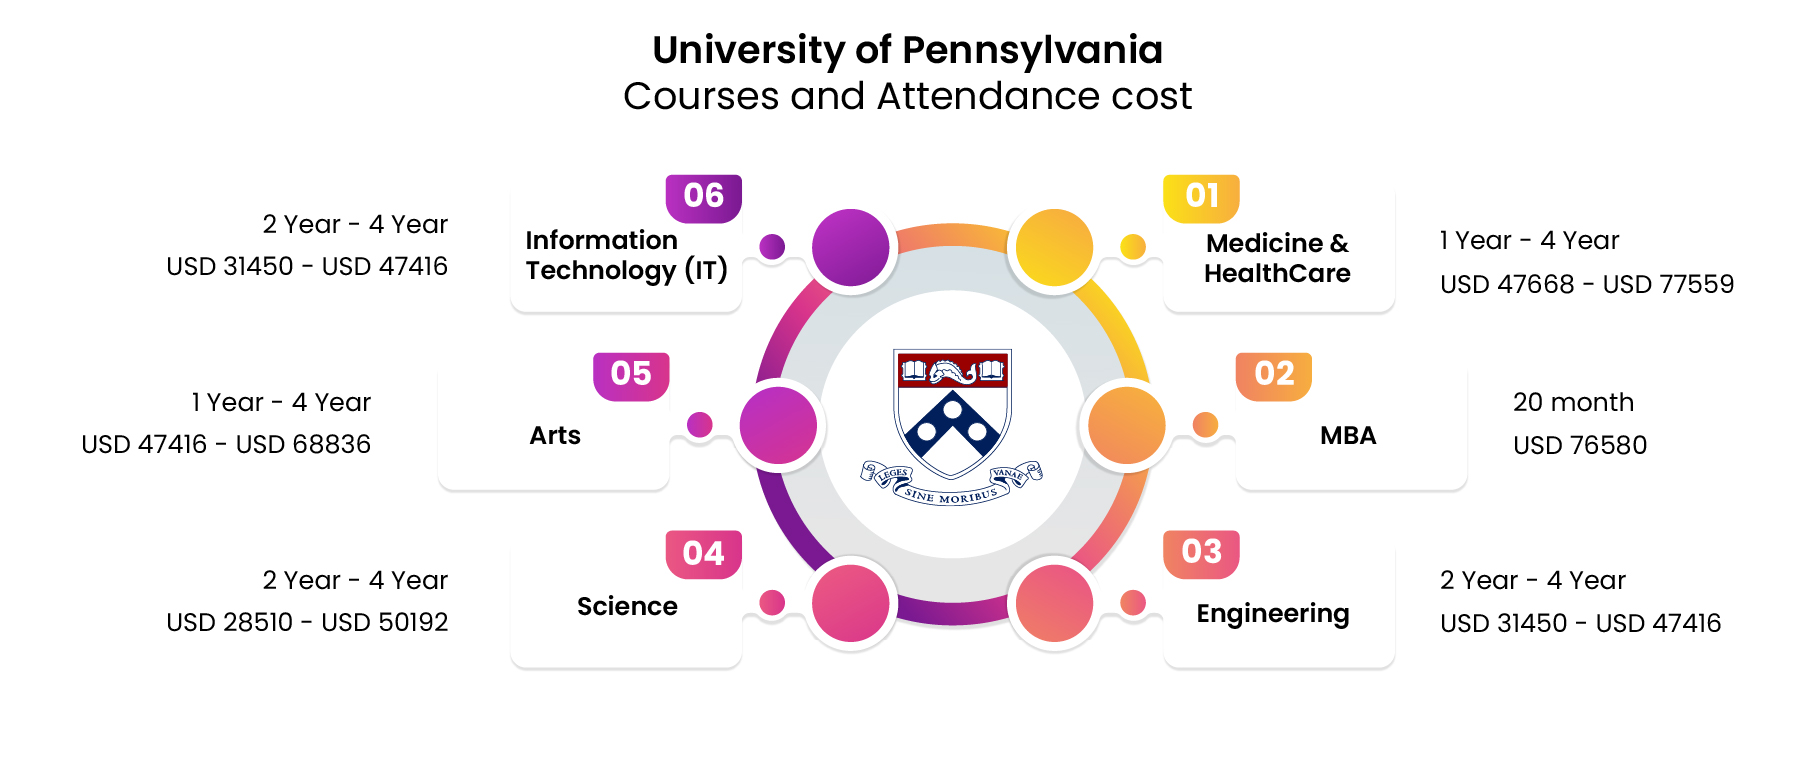 University of Pennsylvania logo and its courses and attendance cost